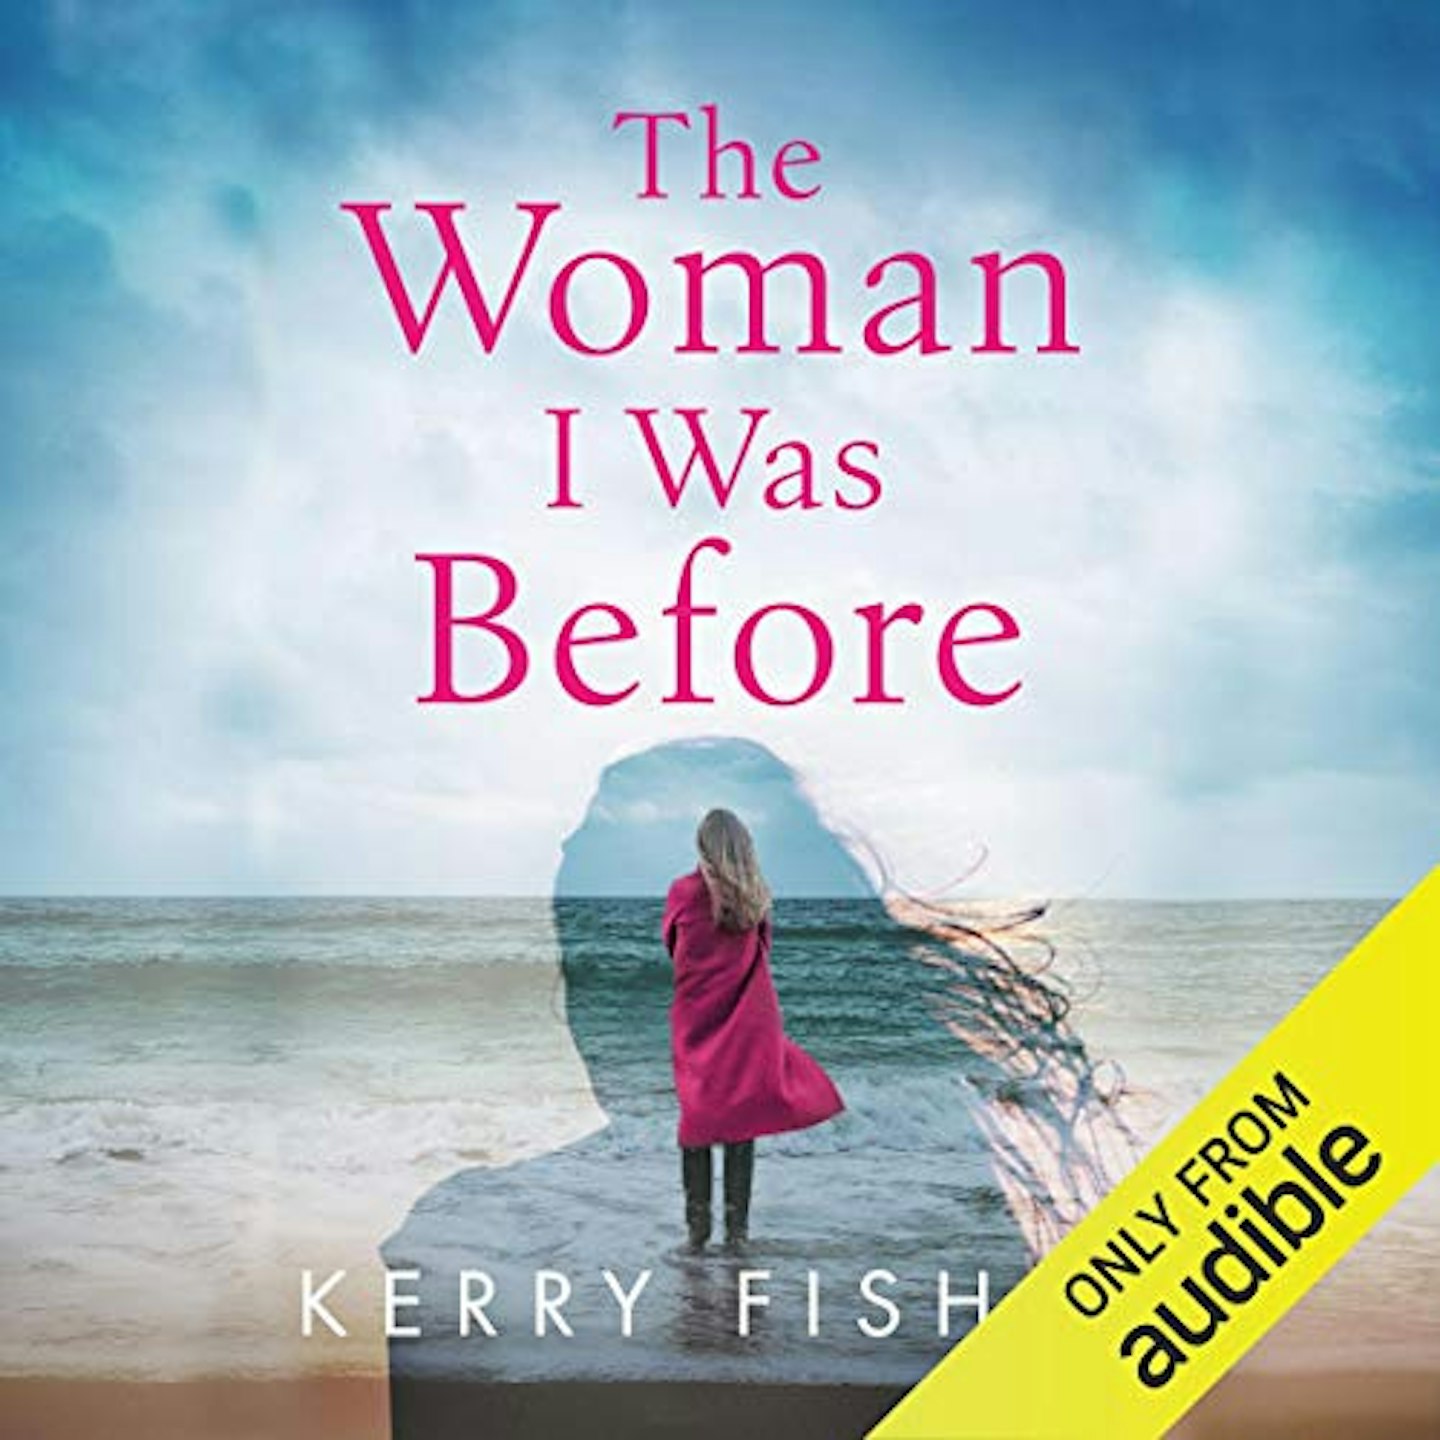 The Woman I Was Before by Kerry Fisher